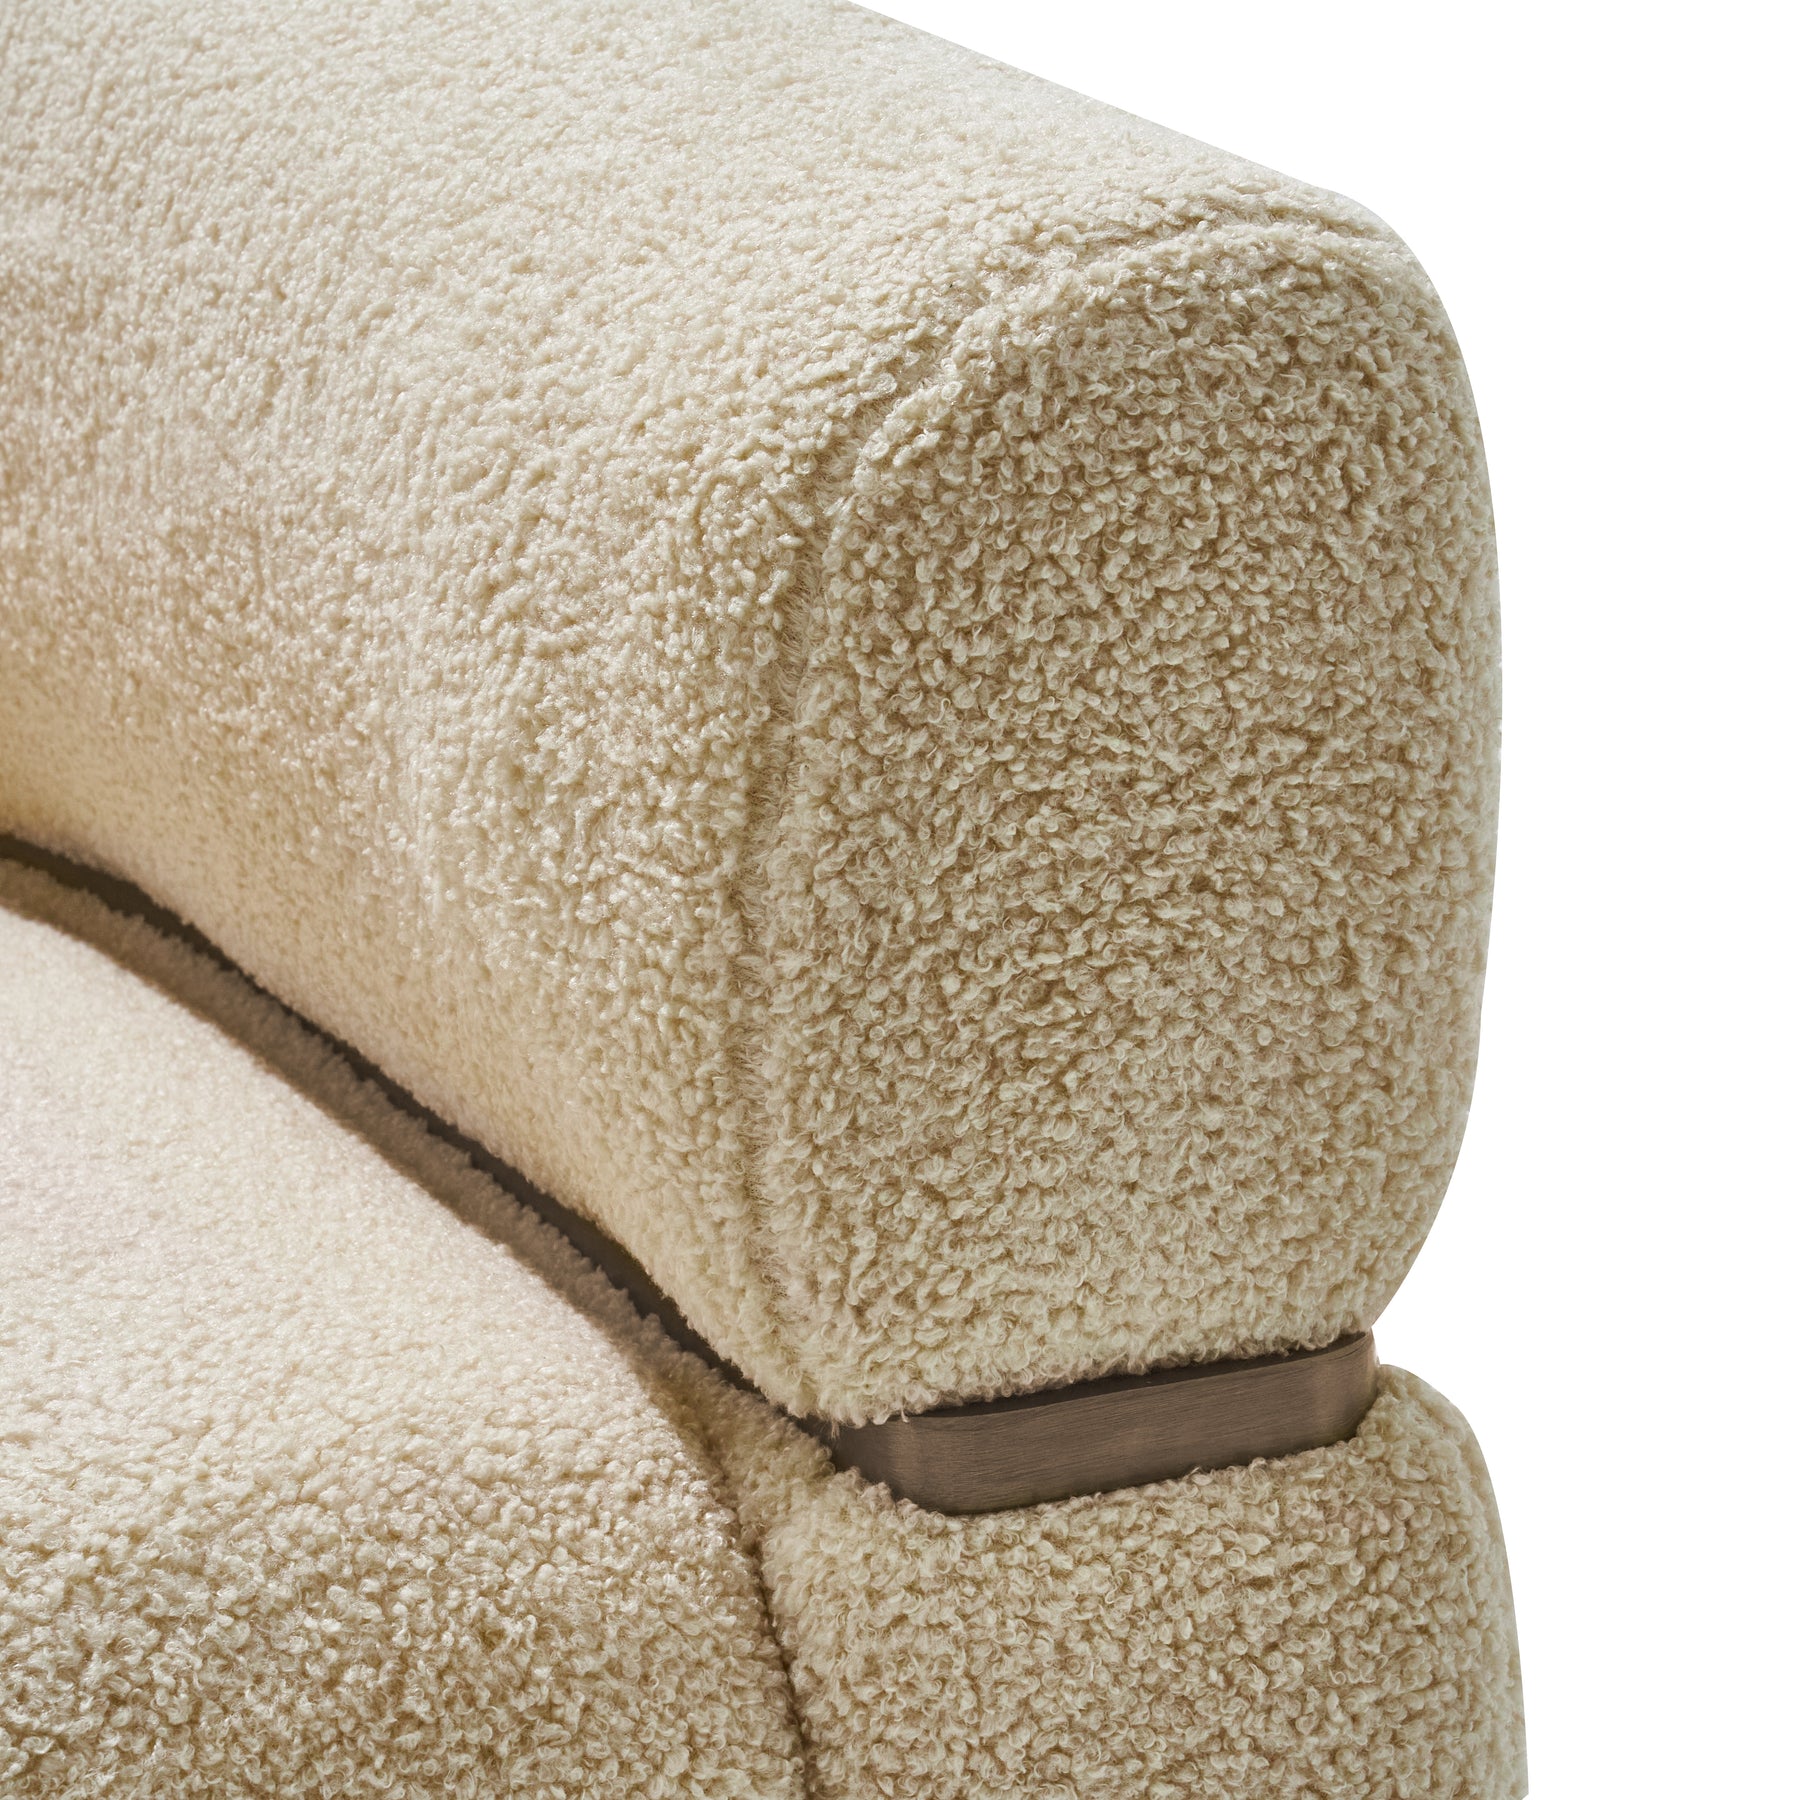 Sherpa Upholstered Club Chair